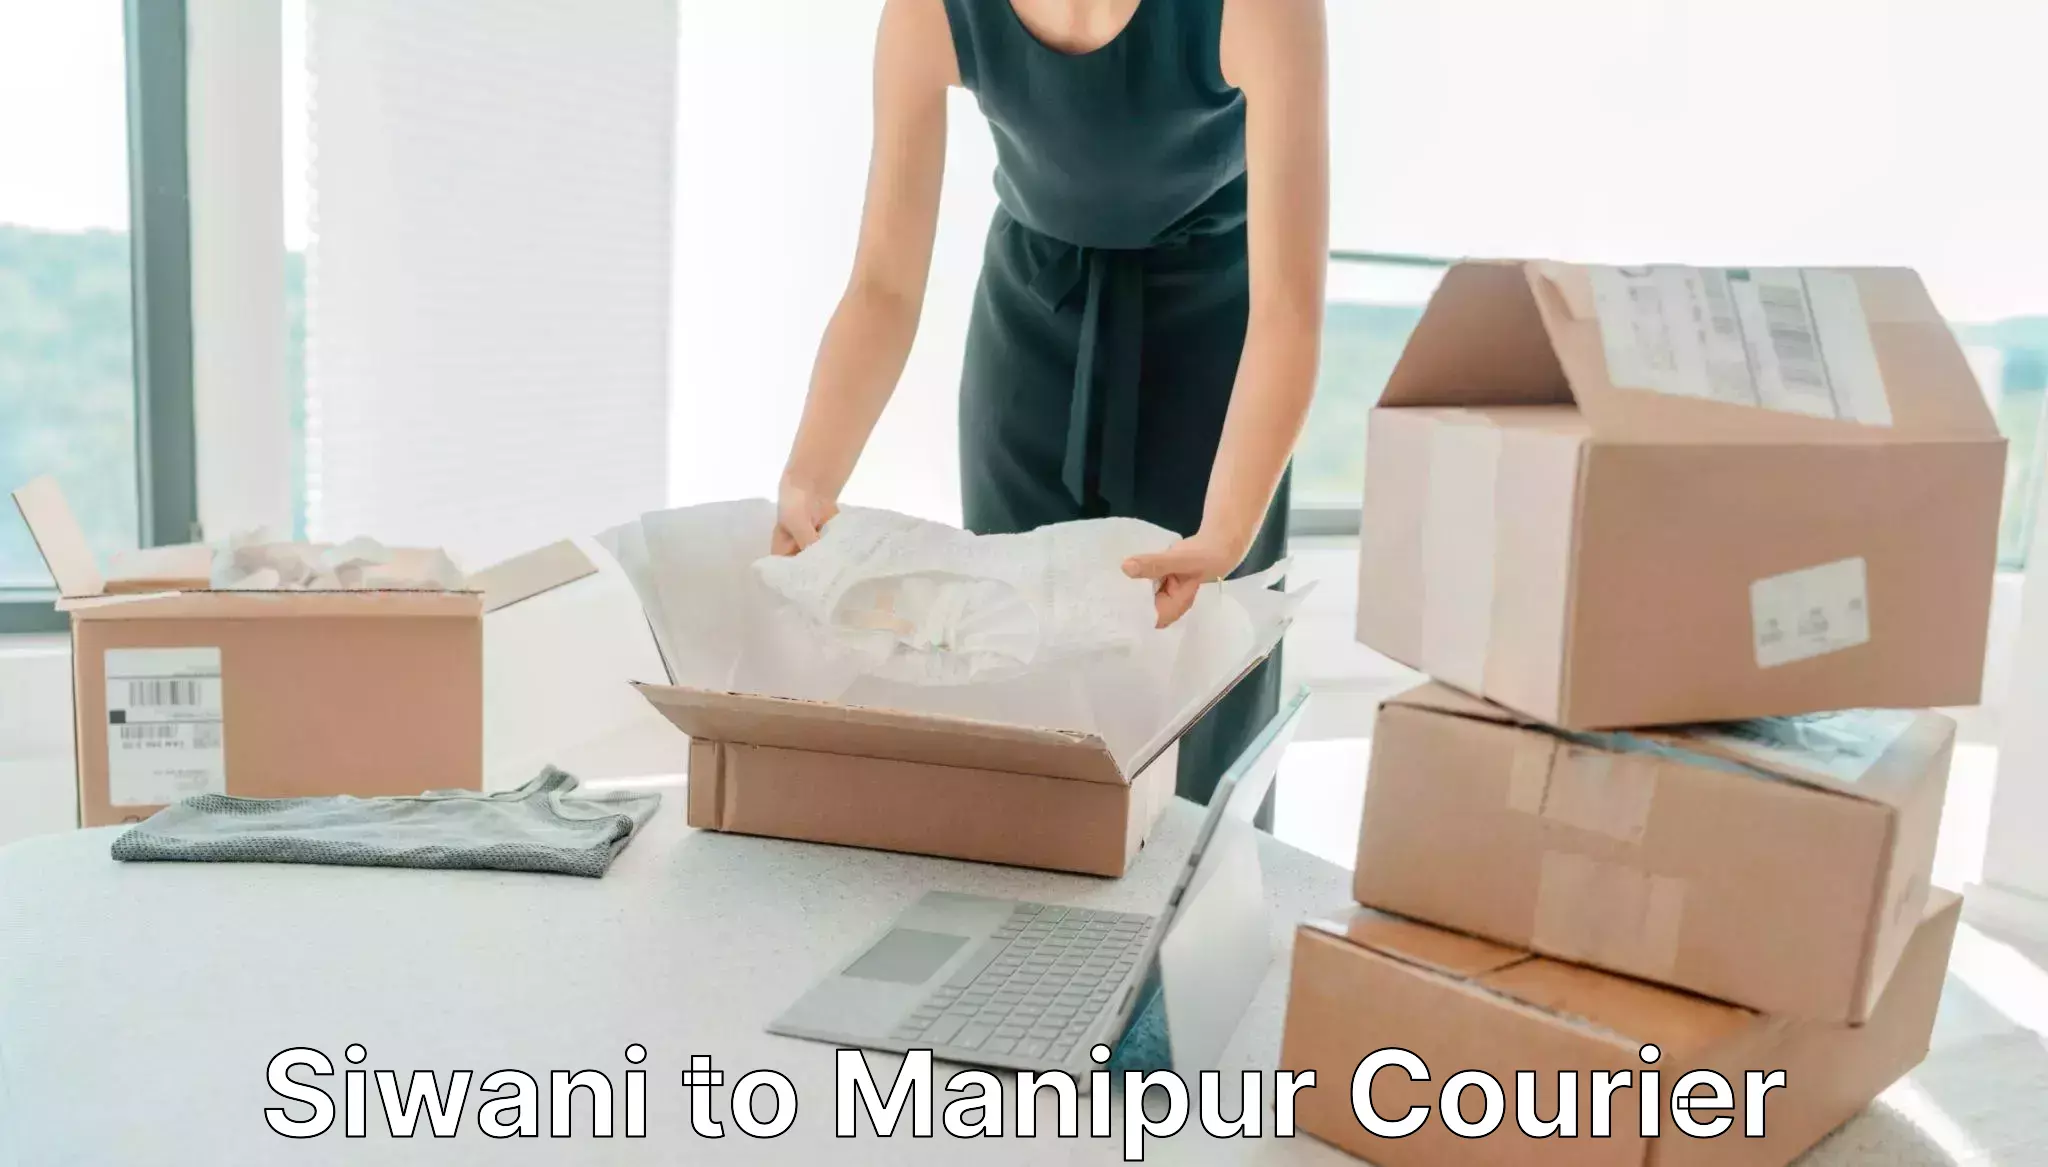 Quality courier partnerships Siwani to Manipur